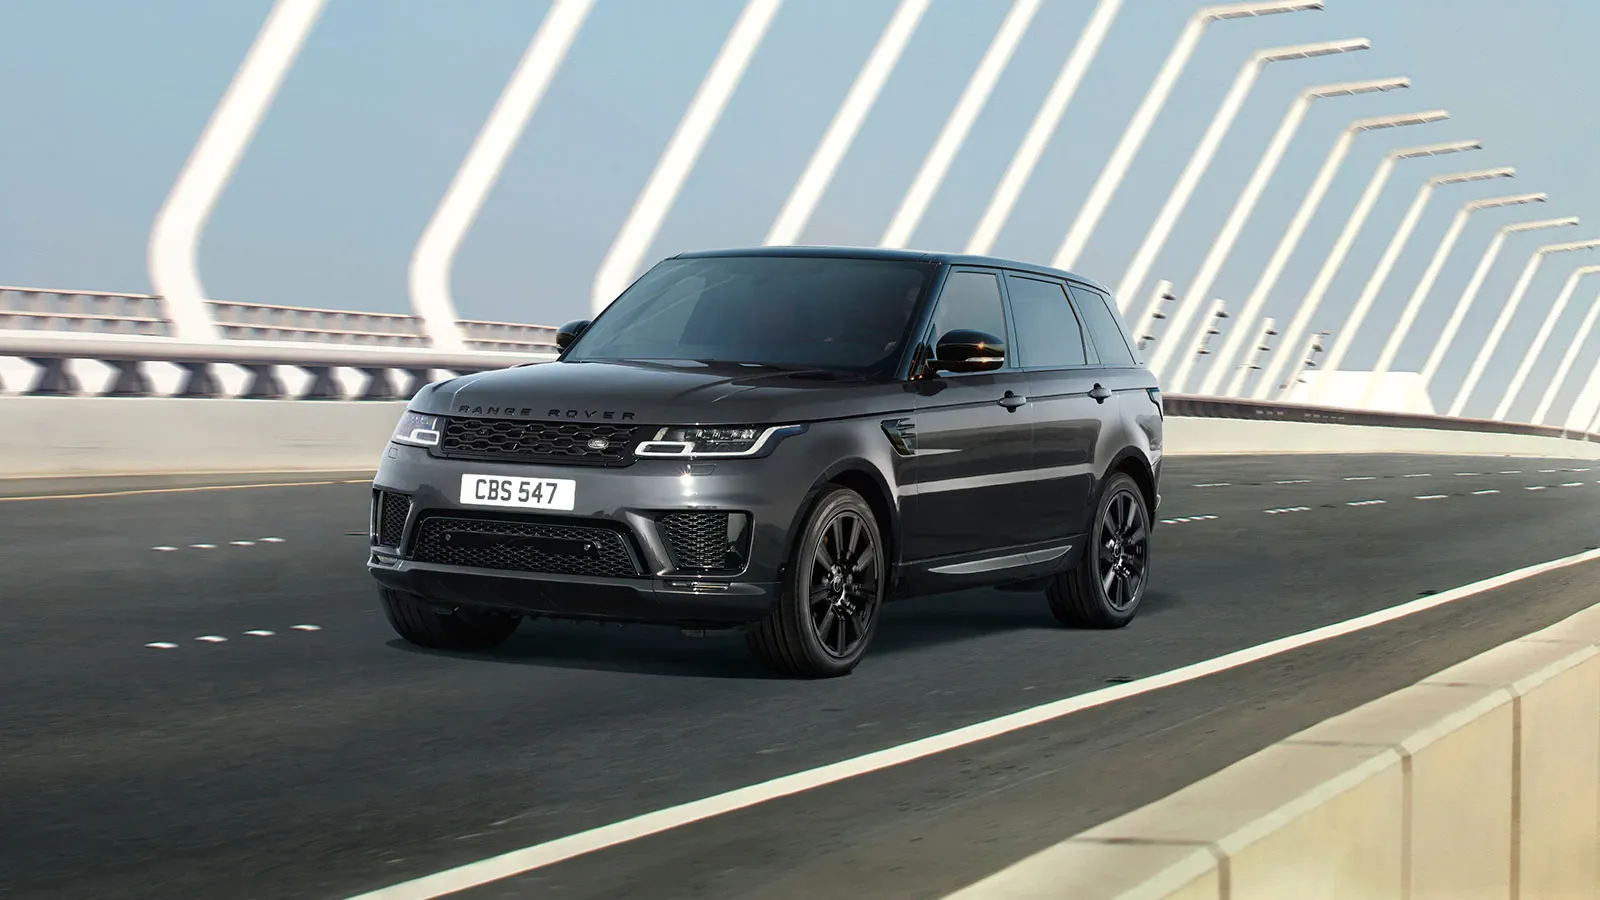 The HSE Dynamic trim of the 2022 Range Rover Sport.